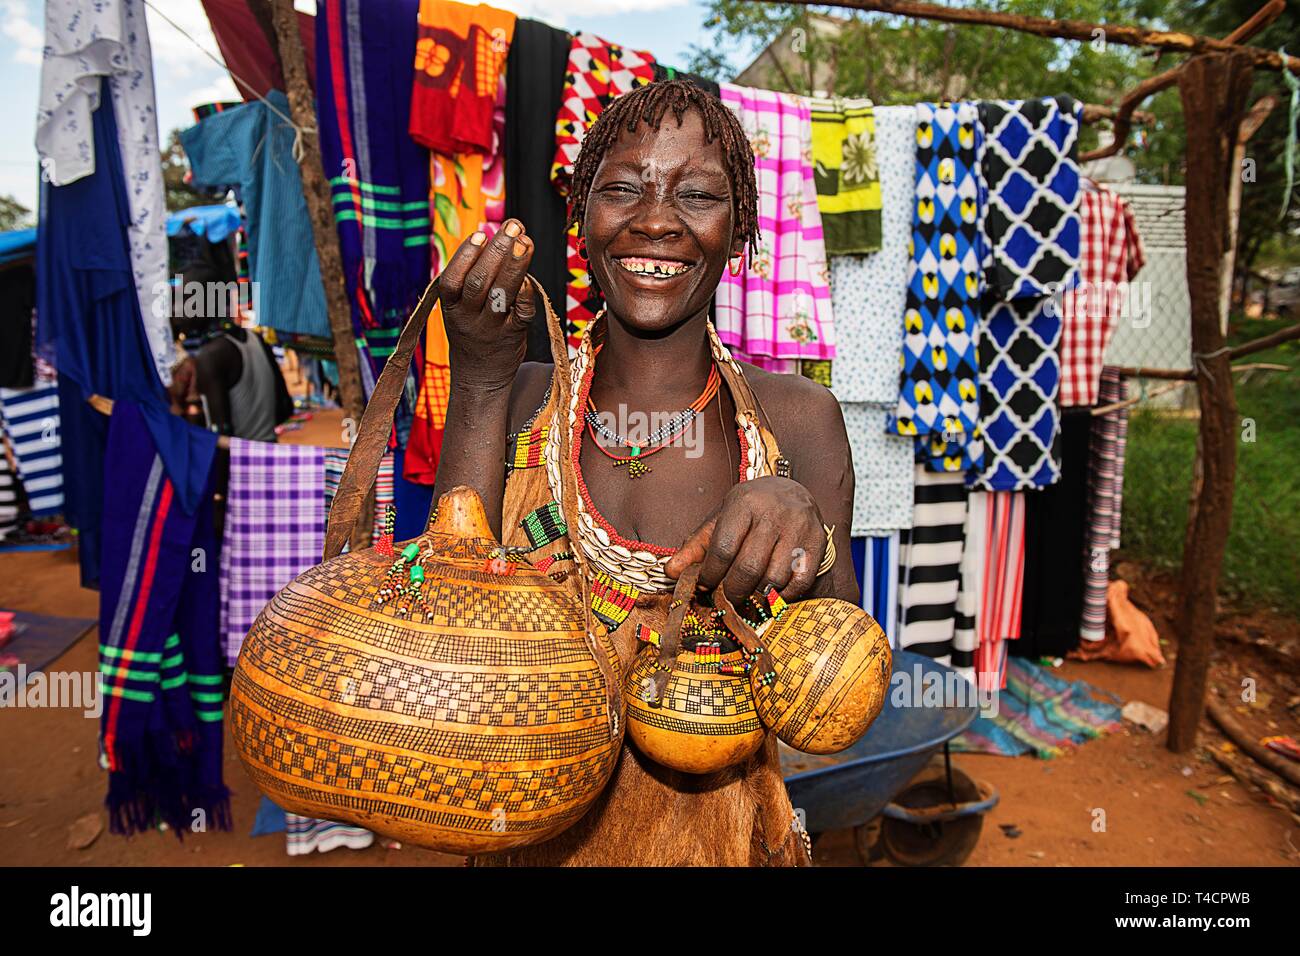 Laughing woman of the Hamer ethnic group sells artfully decorated calabashe pumpkins, market in Dimeka, Lower Omo Valley, Omo region, South Ethiopia Stock Photo